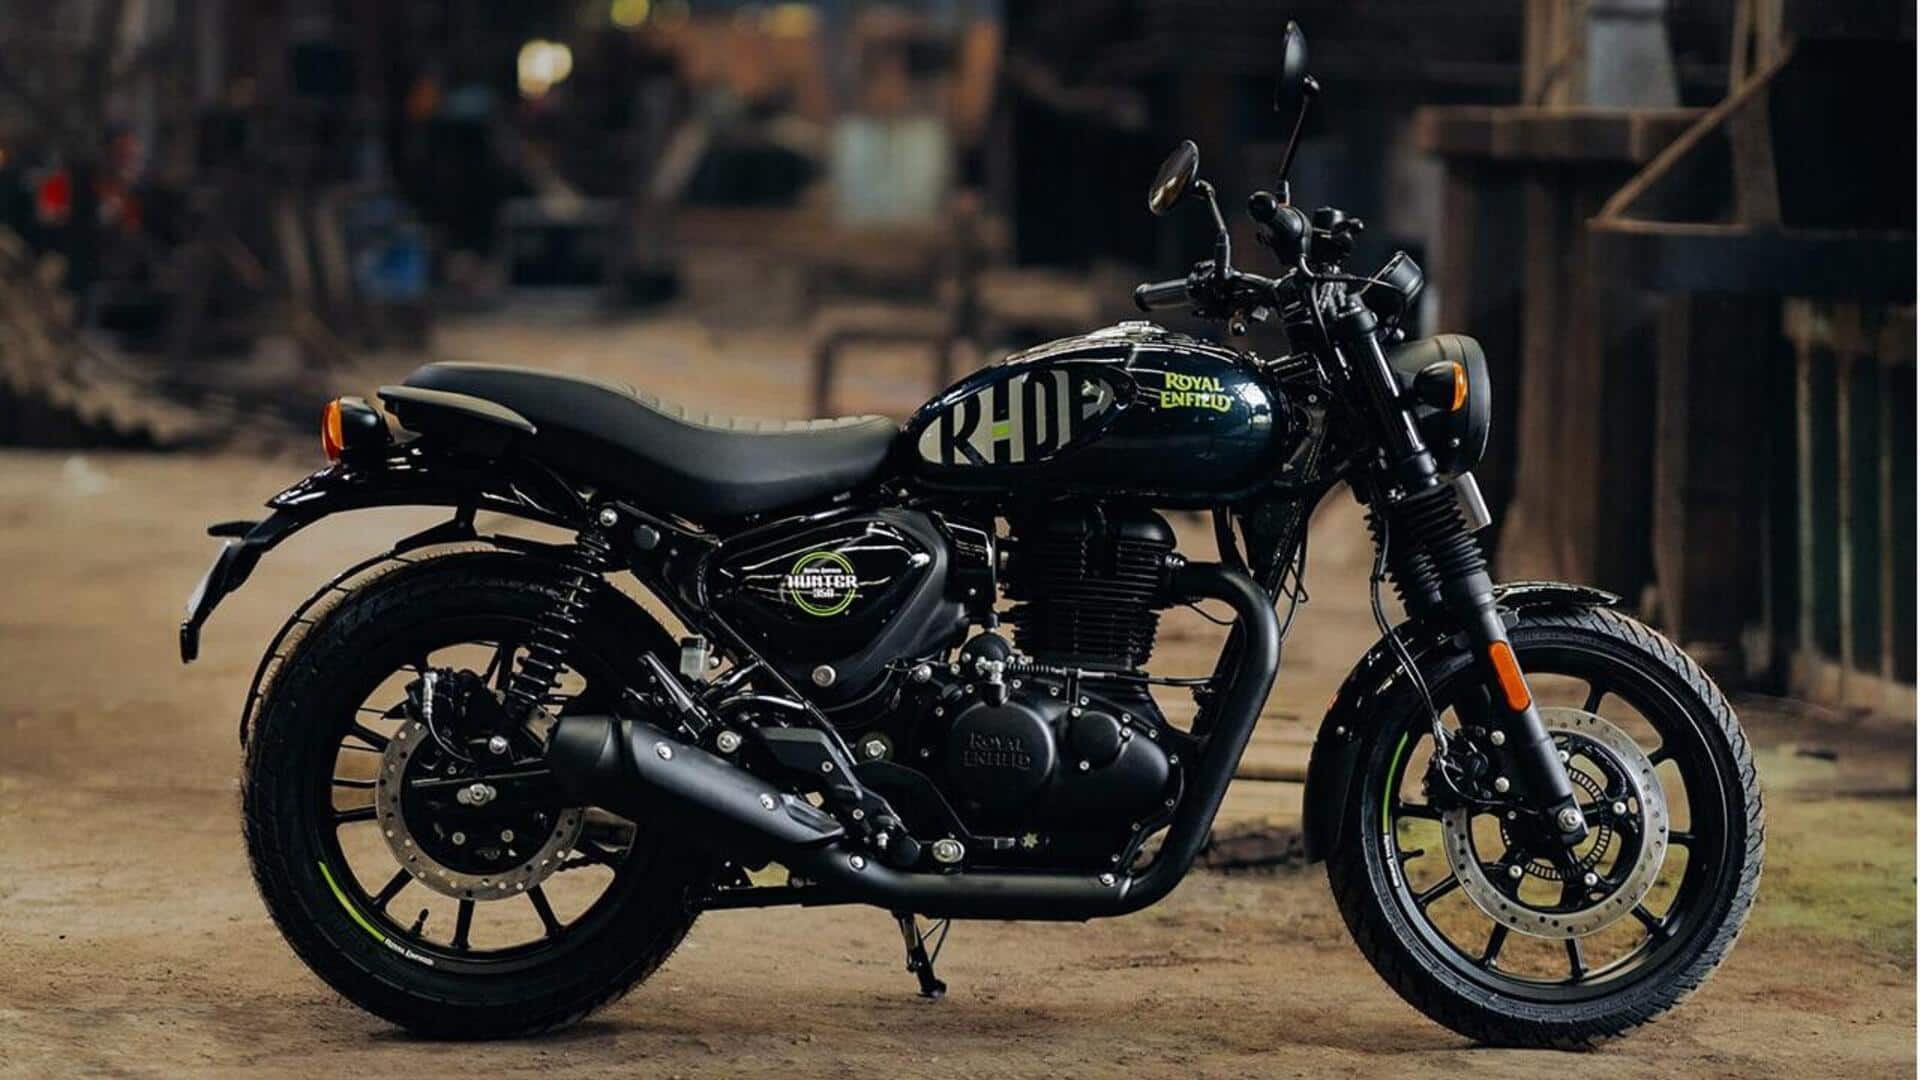 Royal Enfield poised to sell 8 lakh motorcycles in FY24